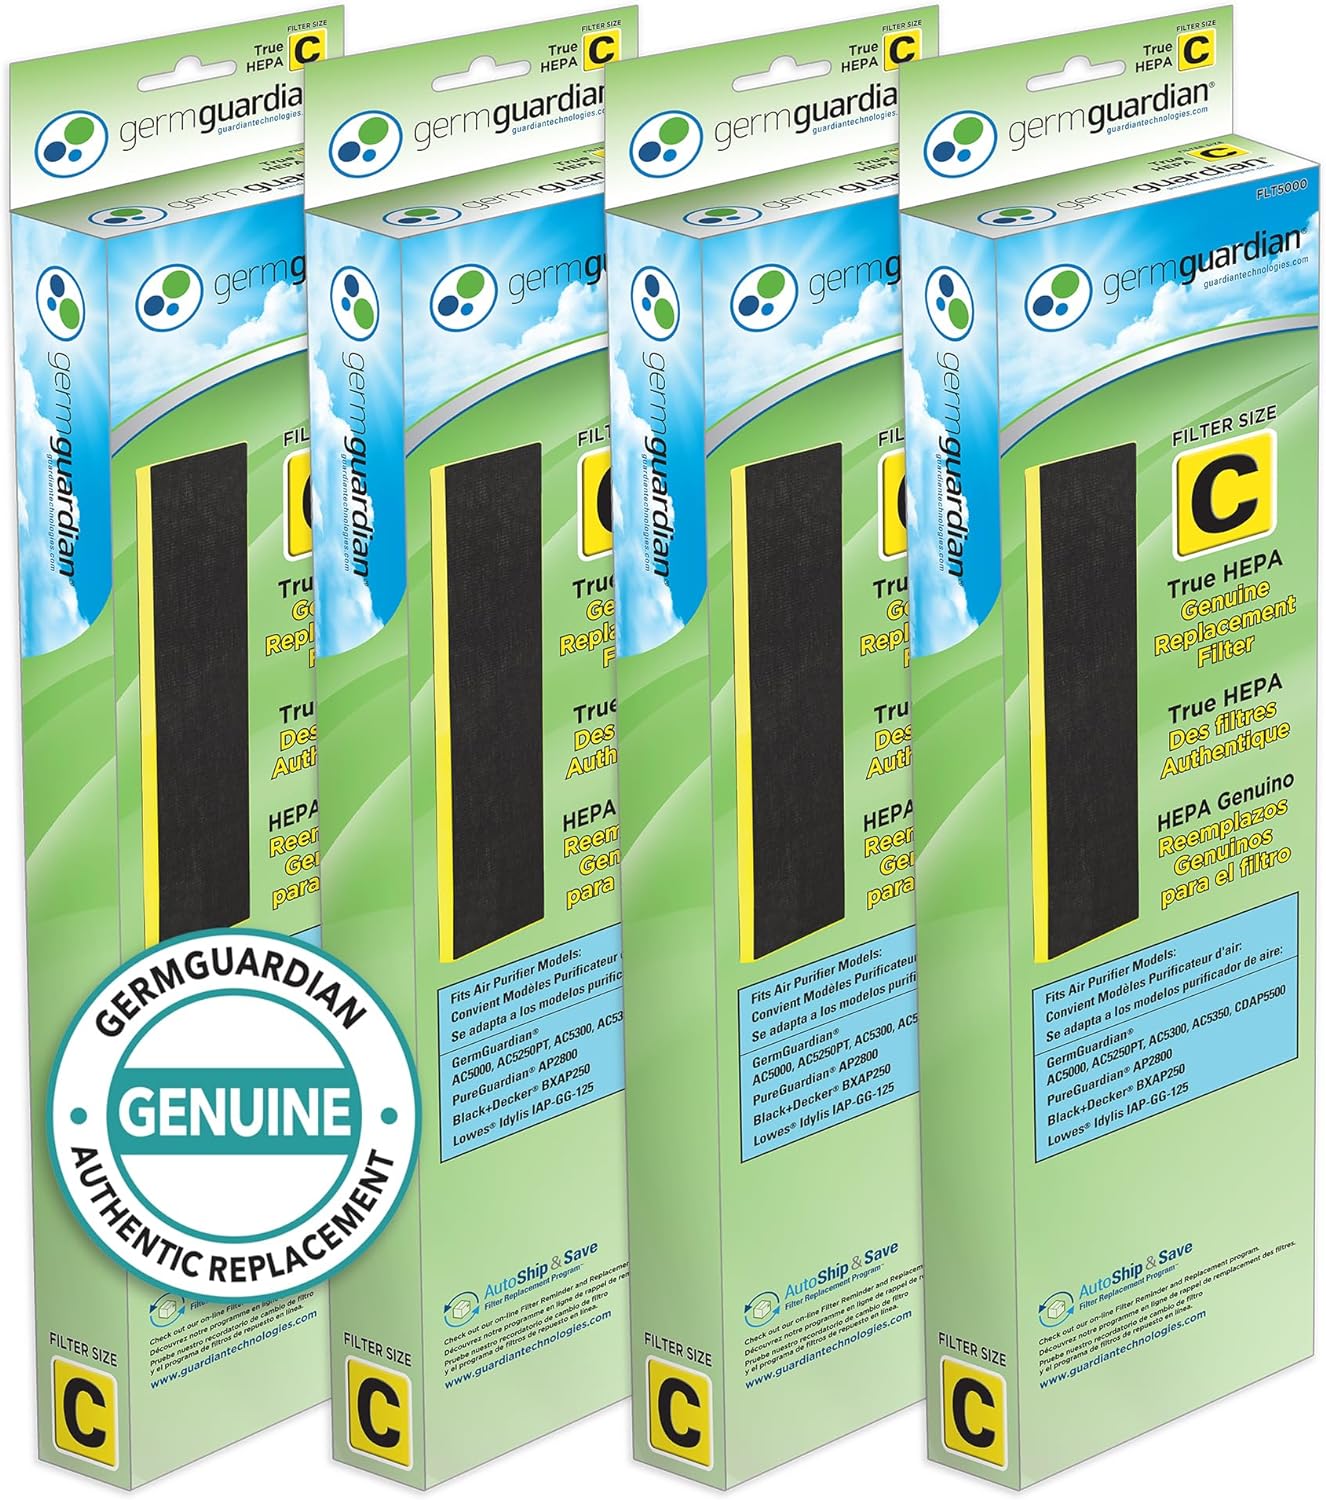 GermGuardian Filter C HEPA Pure Genuine Air Purifier Replacement Filter, Removes 99.97% of Pollutants for AC5000 Series, 4-Pack, Black/Yellow, FLT50004PK